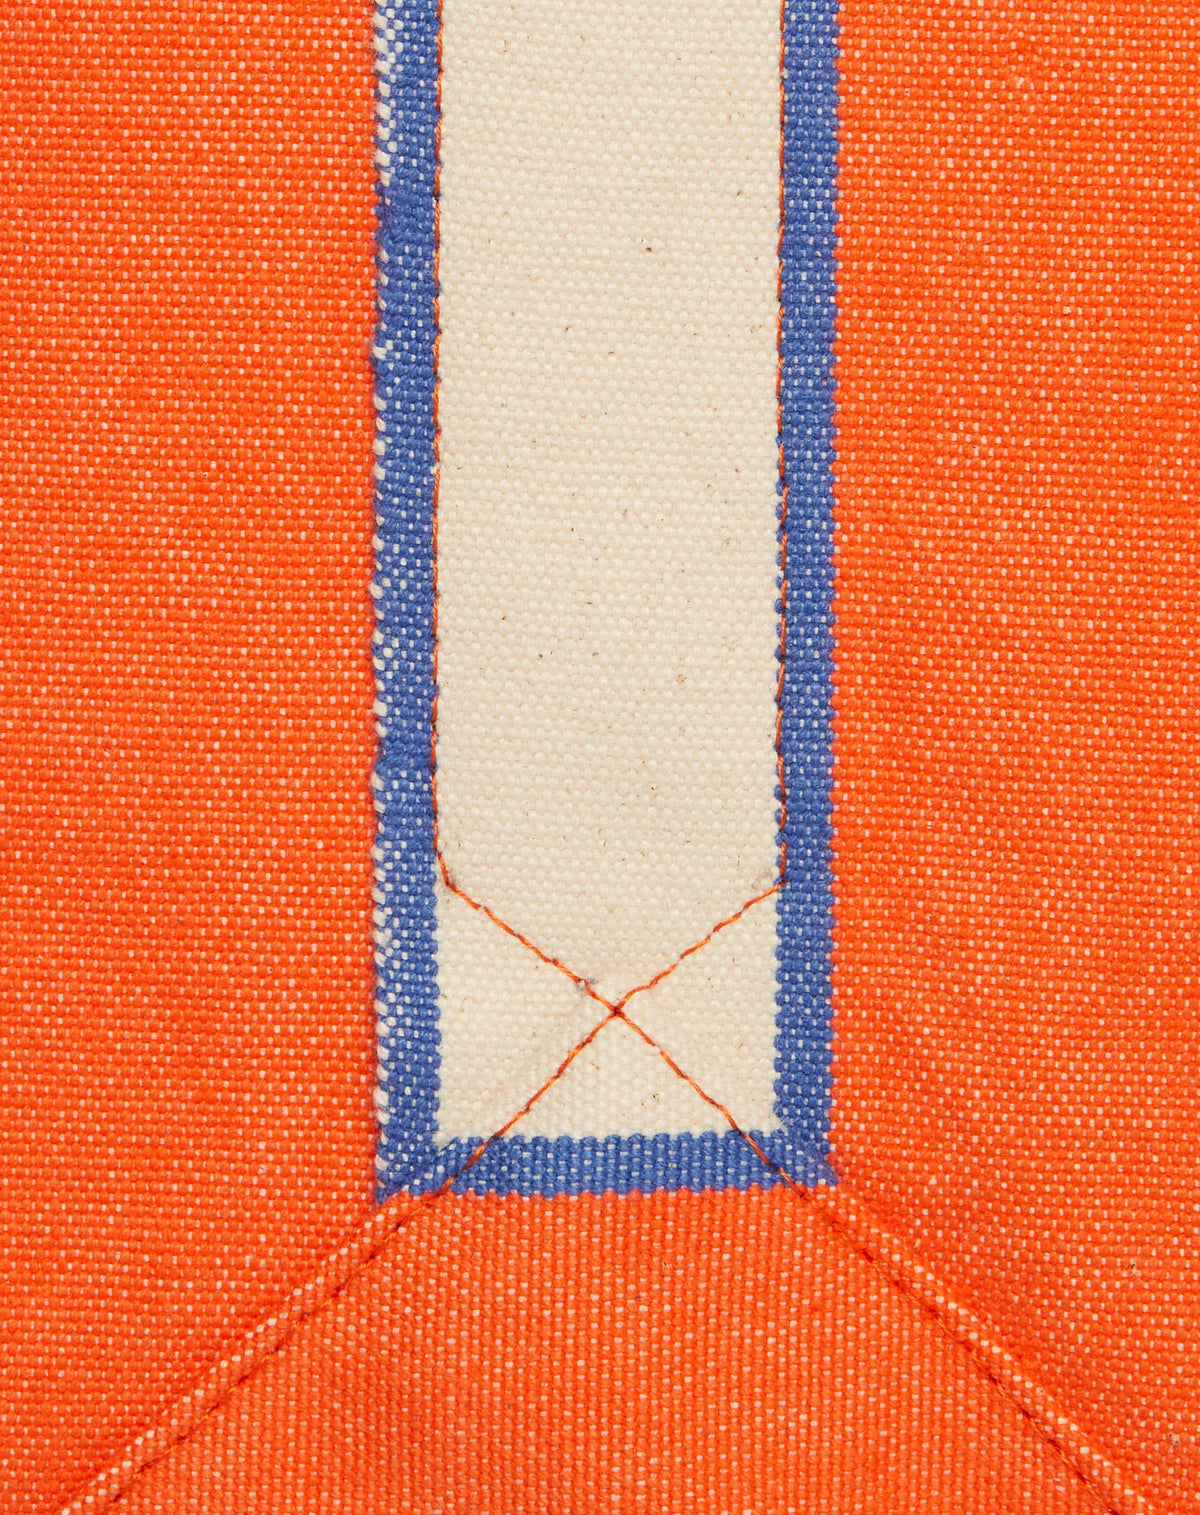 Close-up image of orange canvas with contrasting stripe and stitch detail.